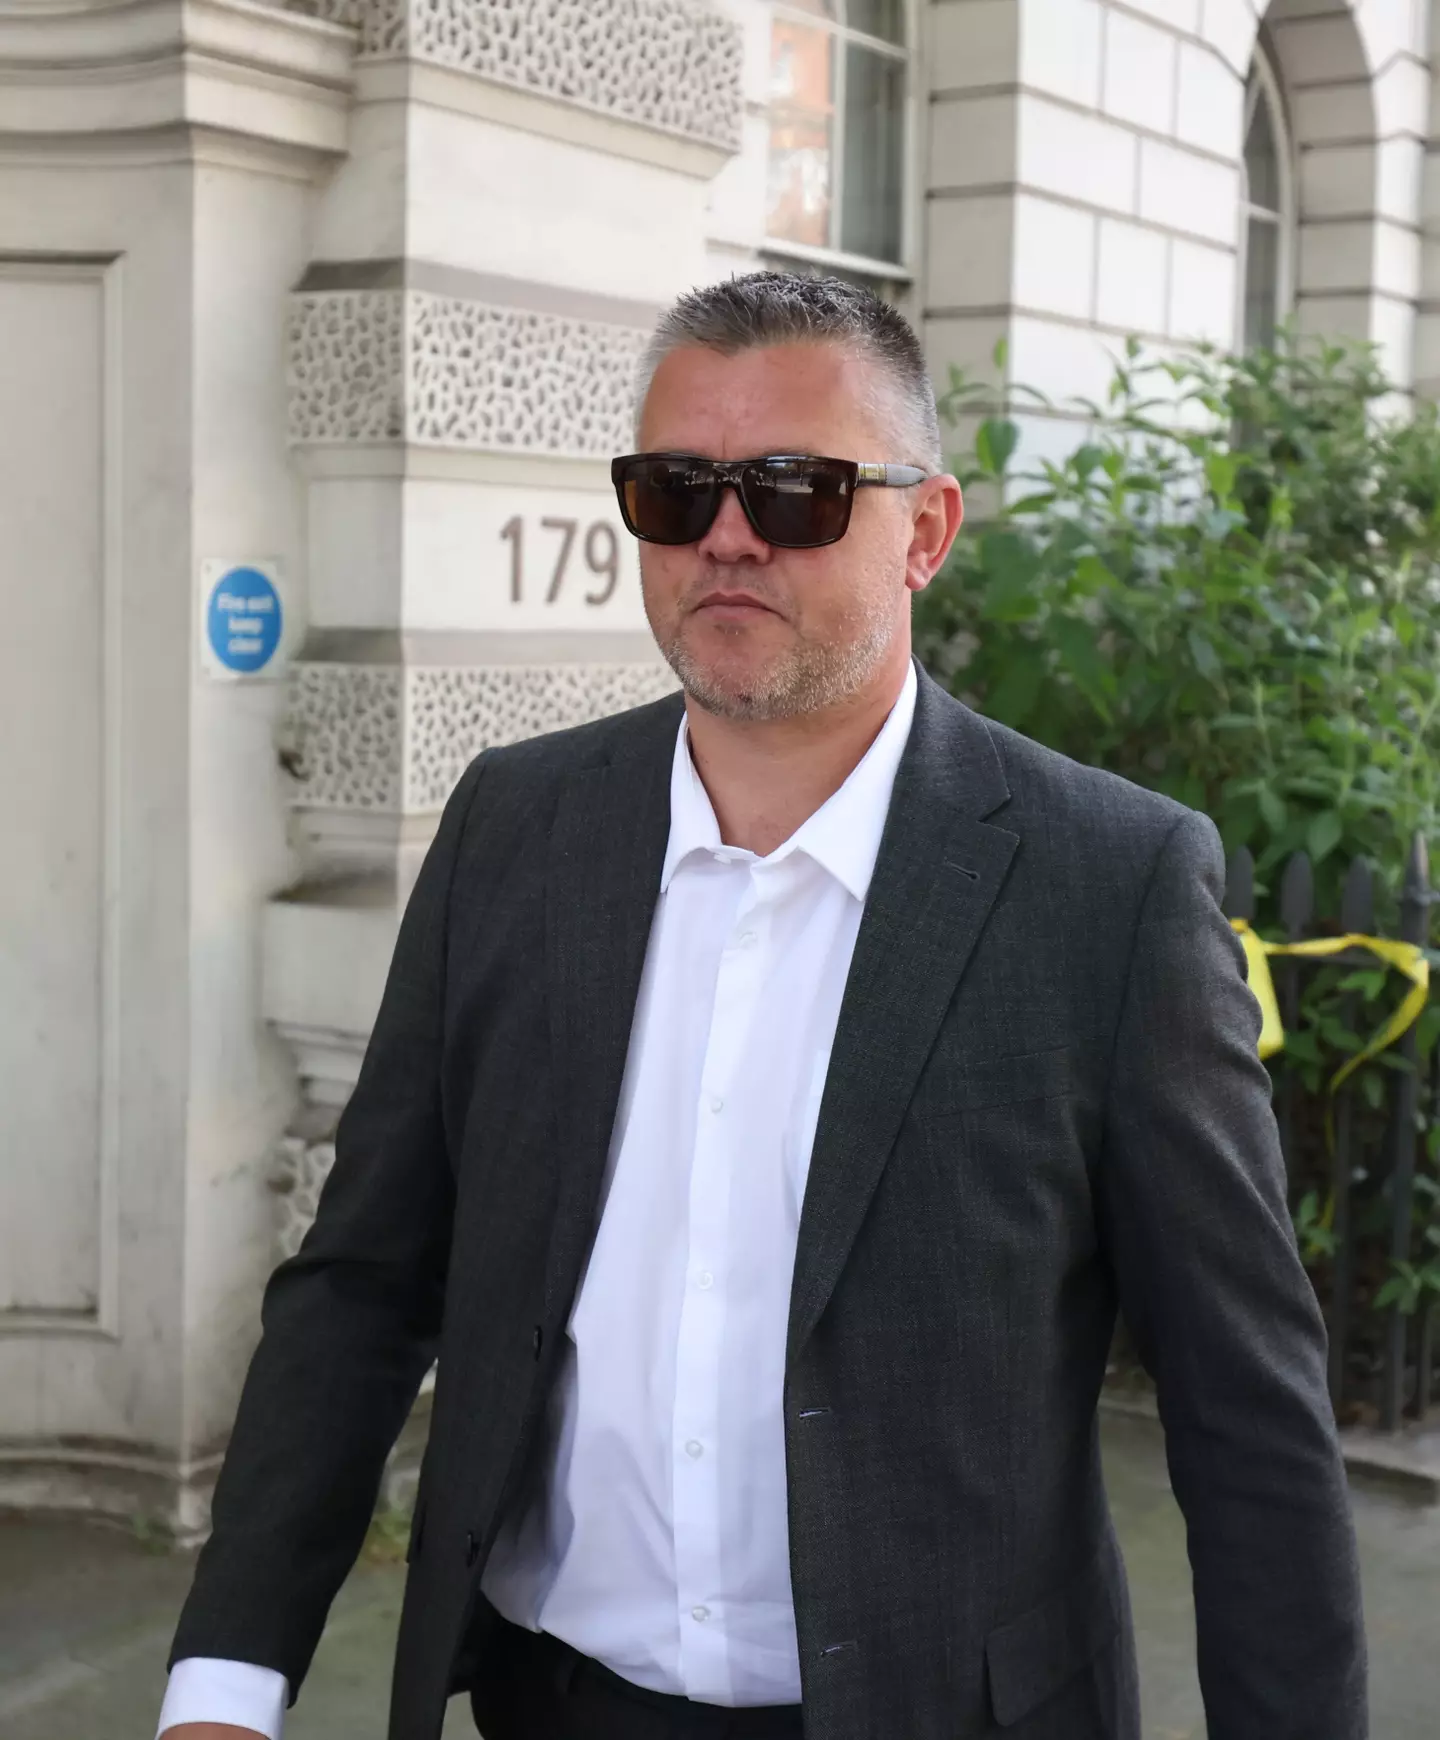 Bussetti was sentenced at Westminster Magistrates Court yesterday.